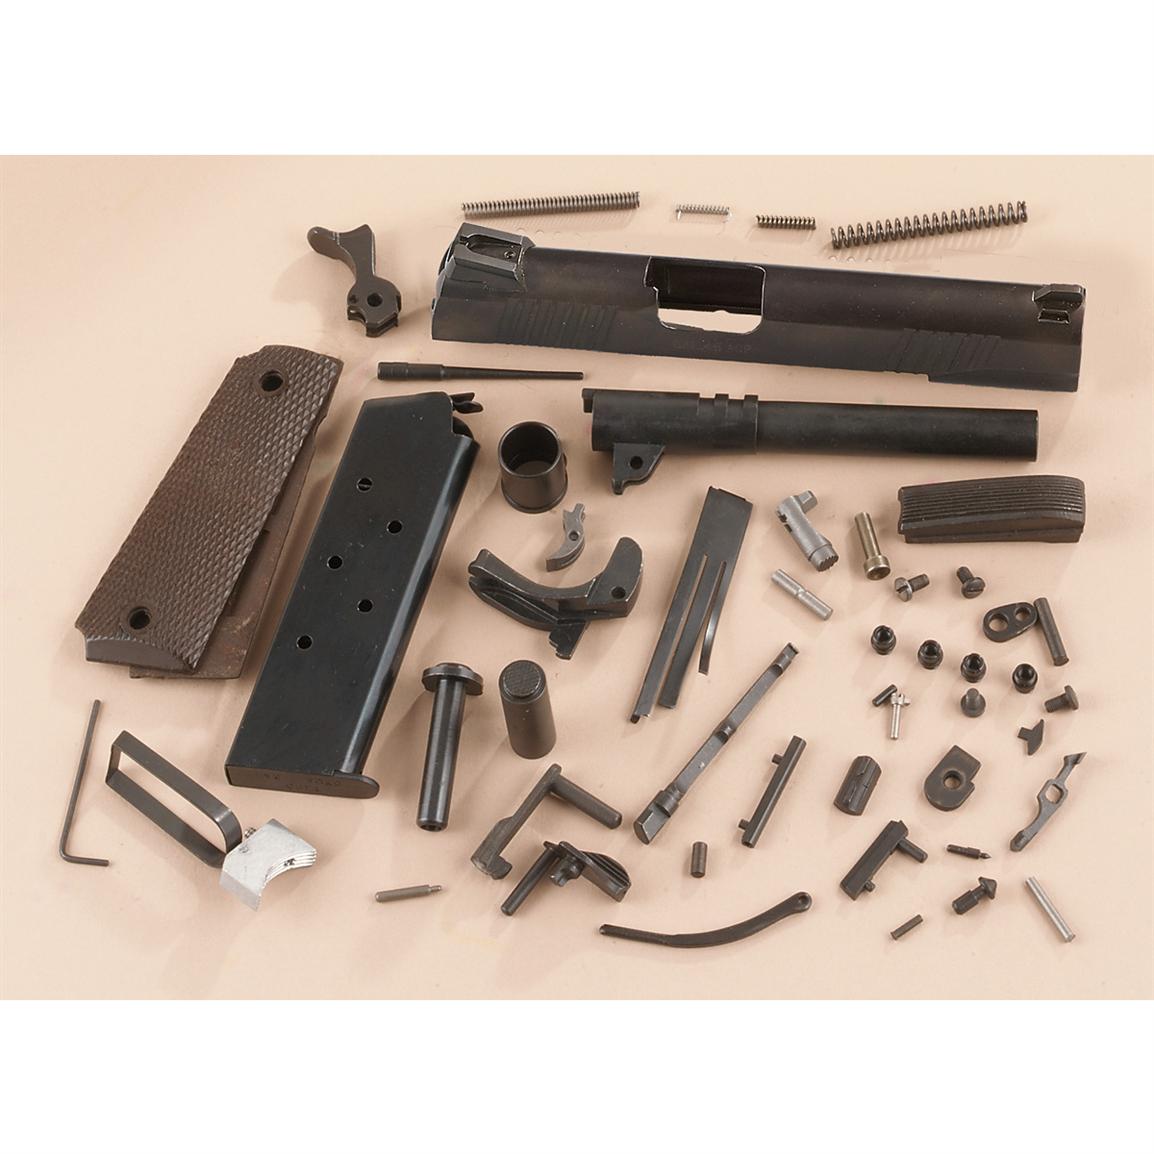 1911 A1 45 Parts Kit With Tactical Slide 90505 Replacement Parts At Sportsman S Guide